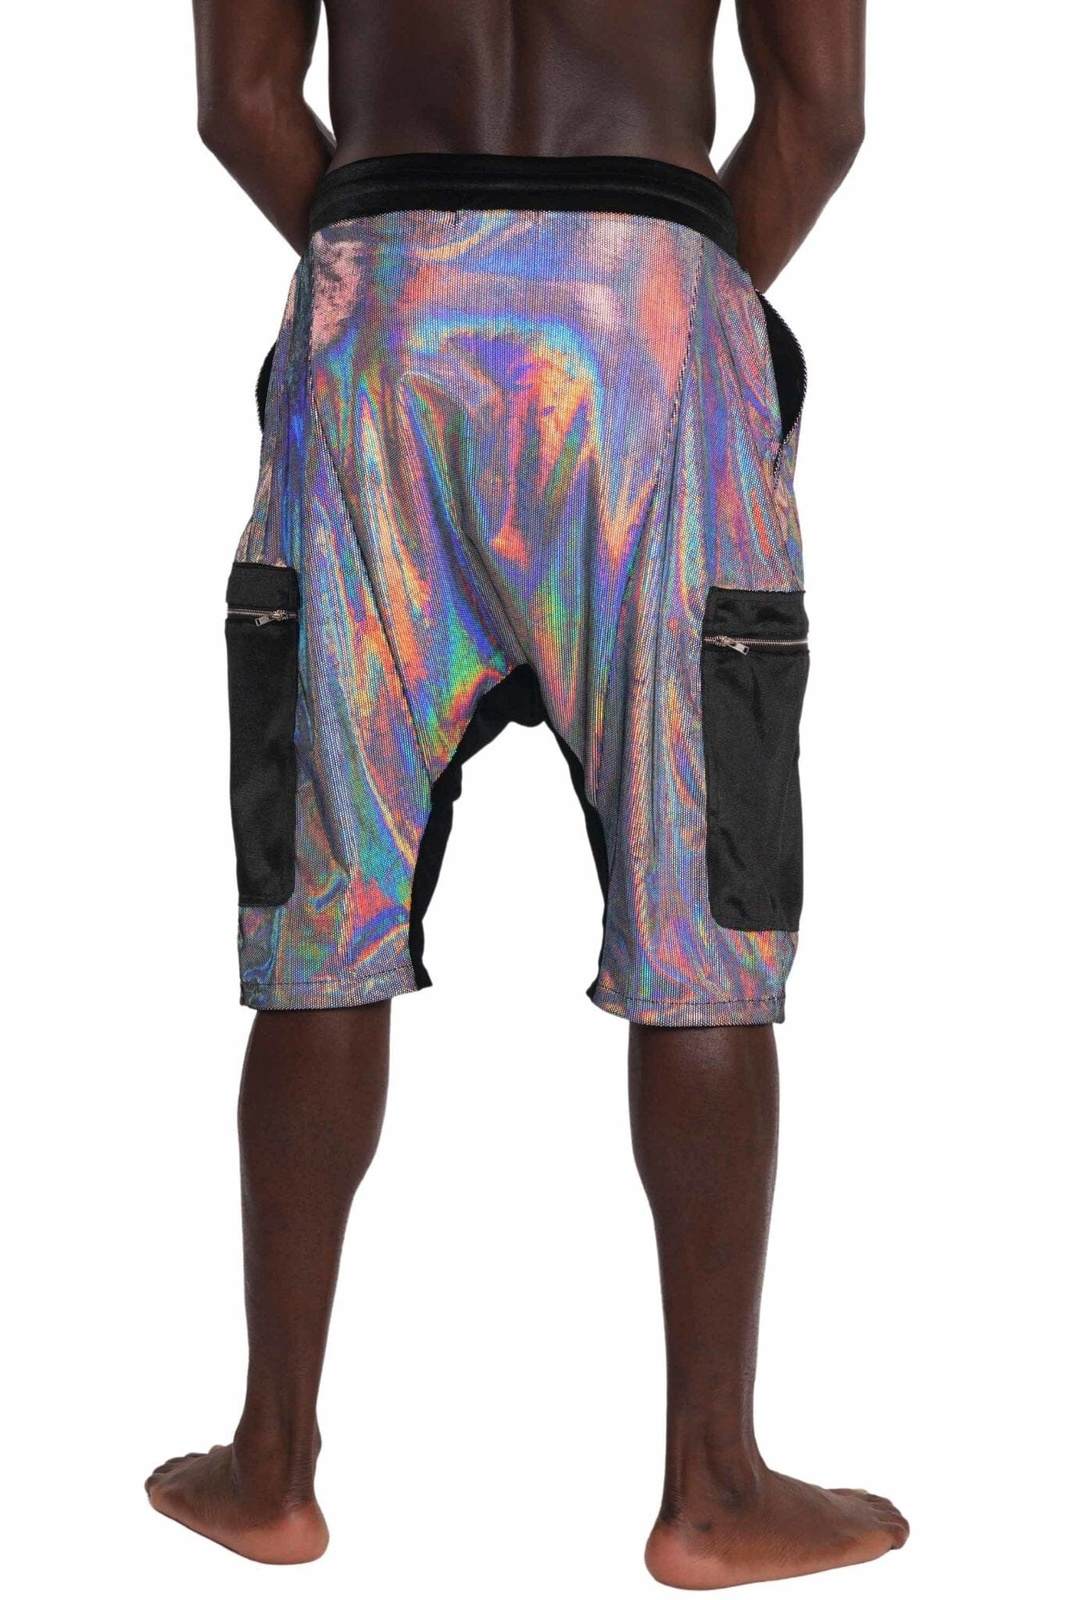 Mens Holographic Silver Harem Shorts with cargo pockets from Love Khaos